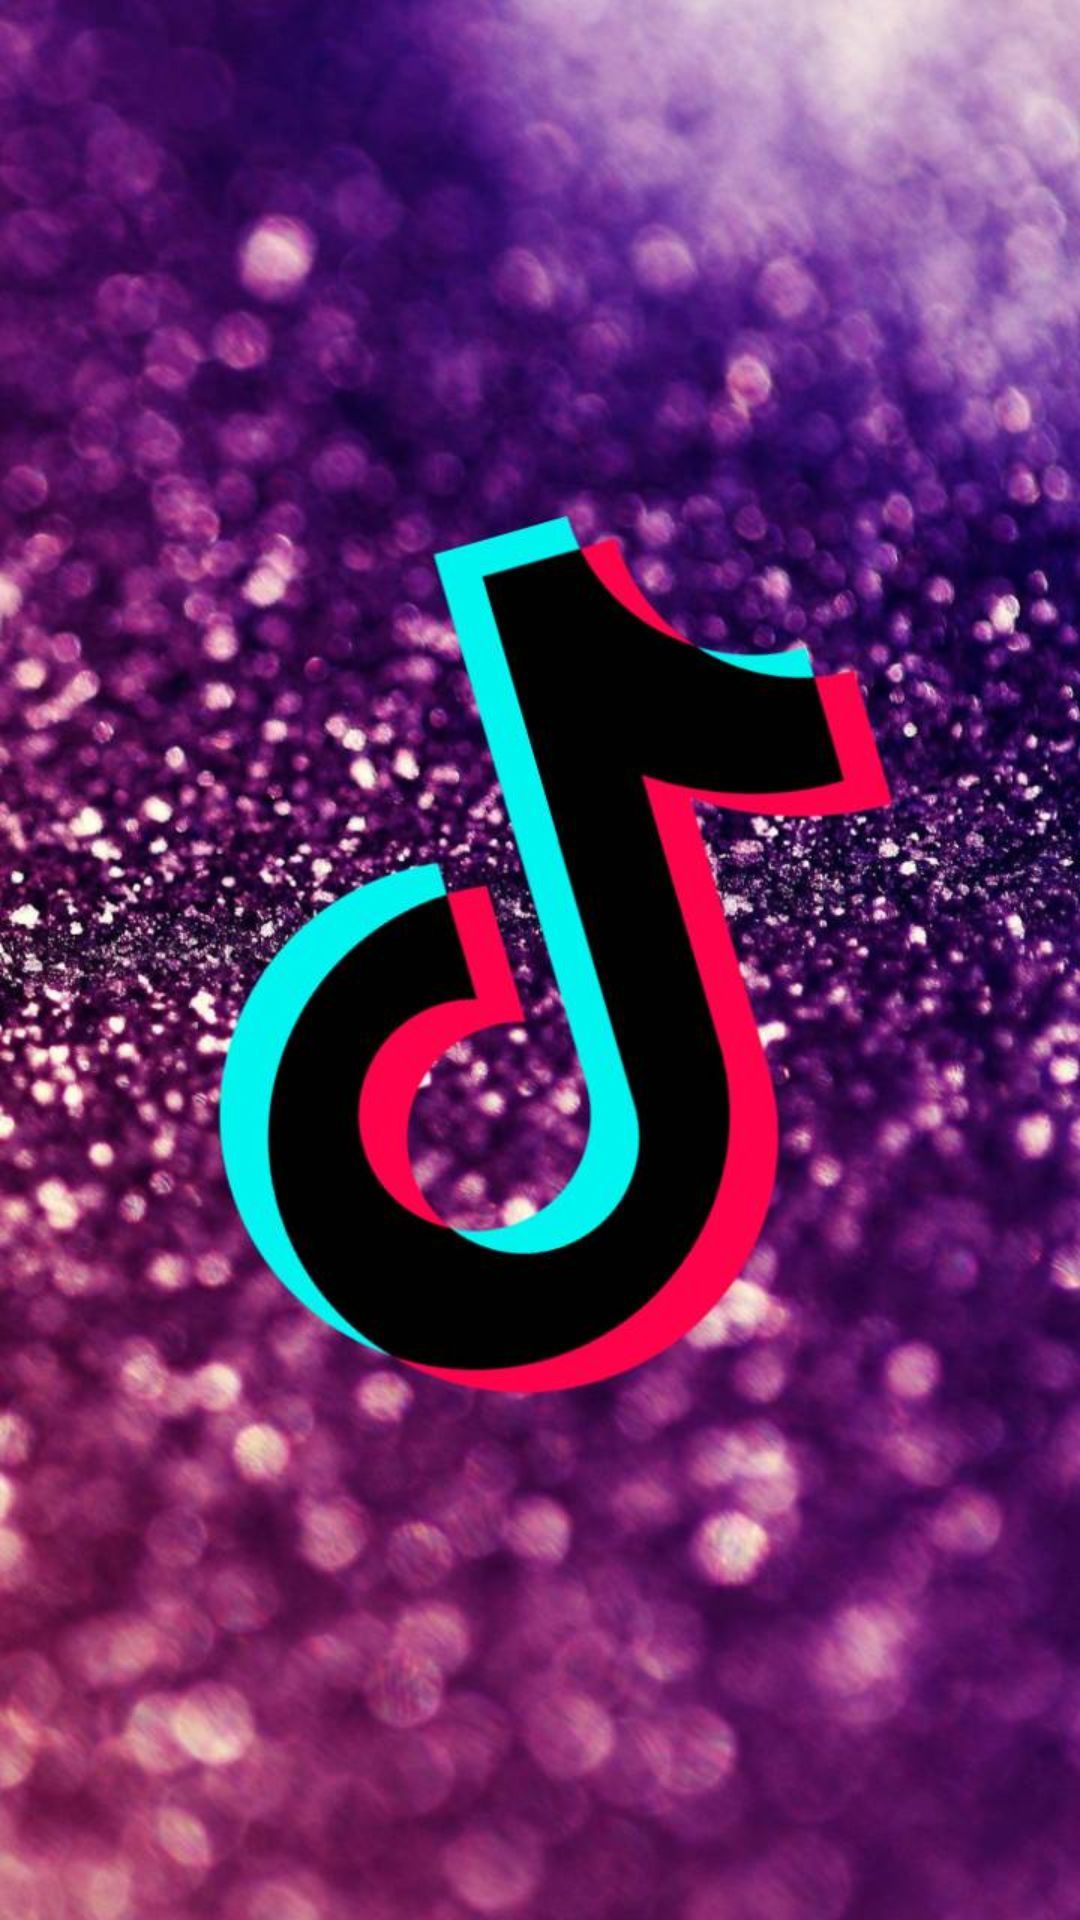 TikTok is a video-sharing social networking service that has gained popularity in recent years. - TikTok